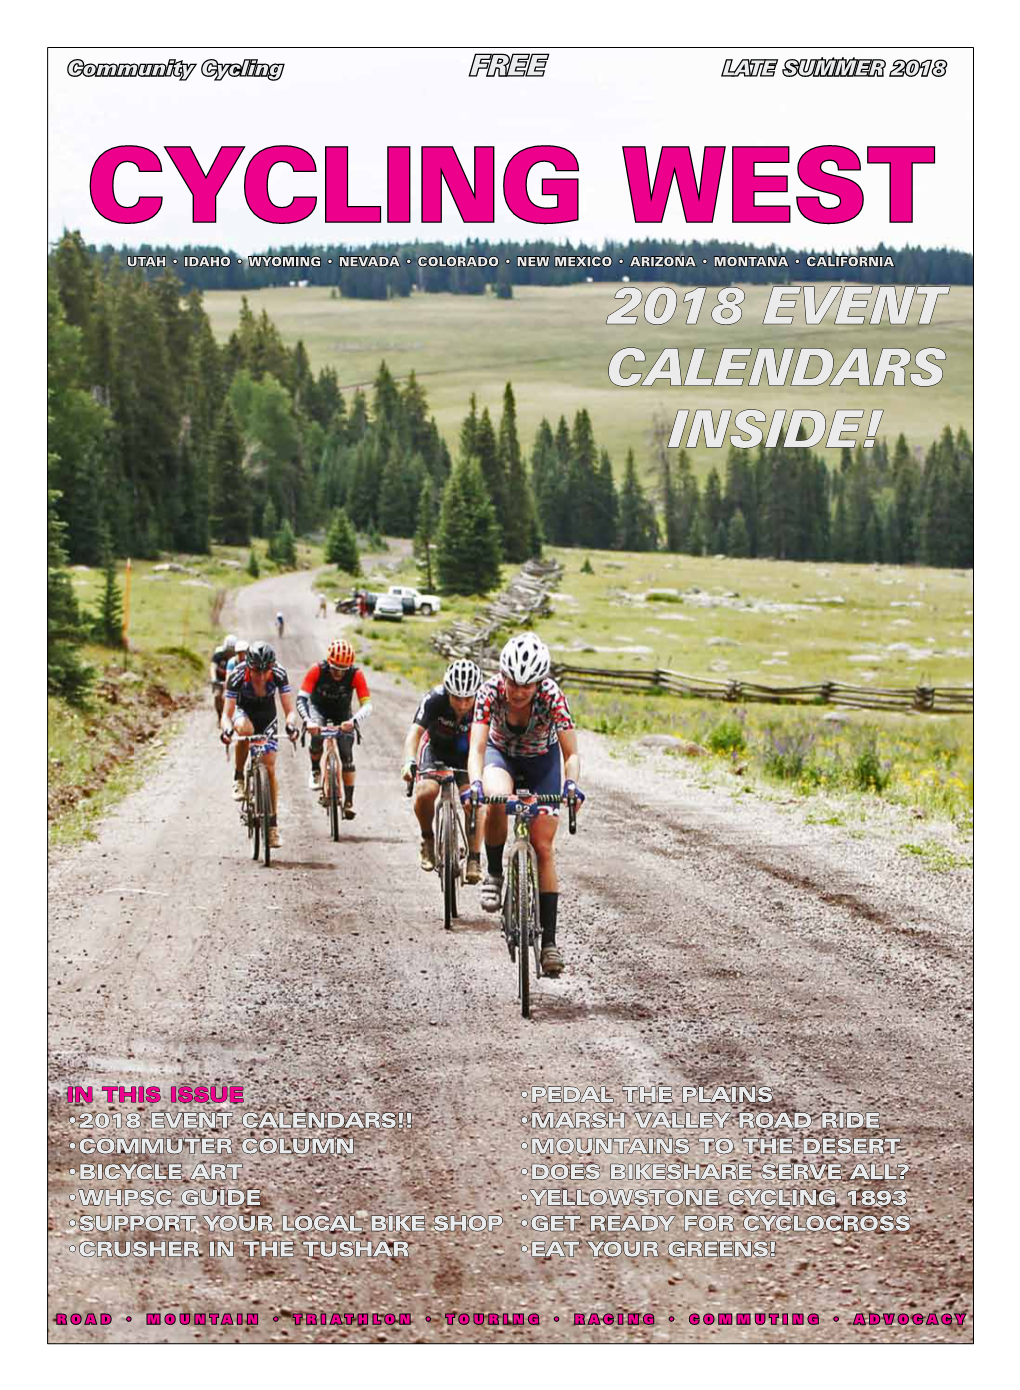 Cycling Utah and Cycling West Magazine August 2018 Issue